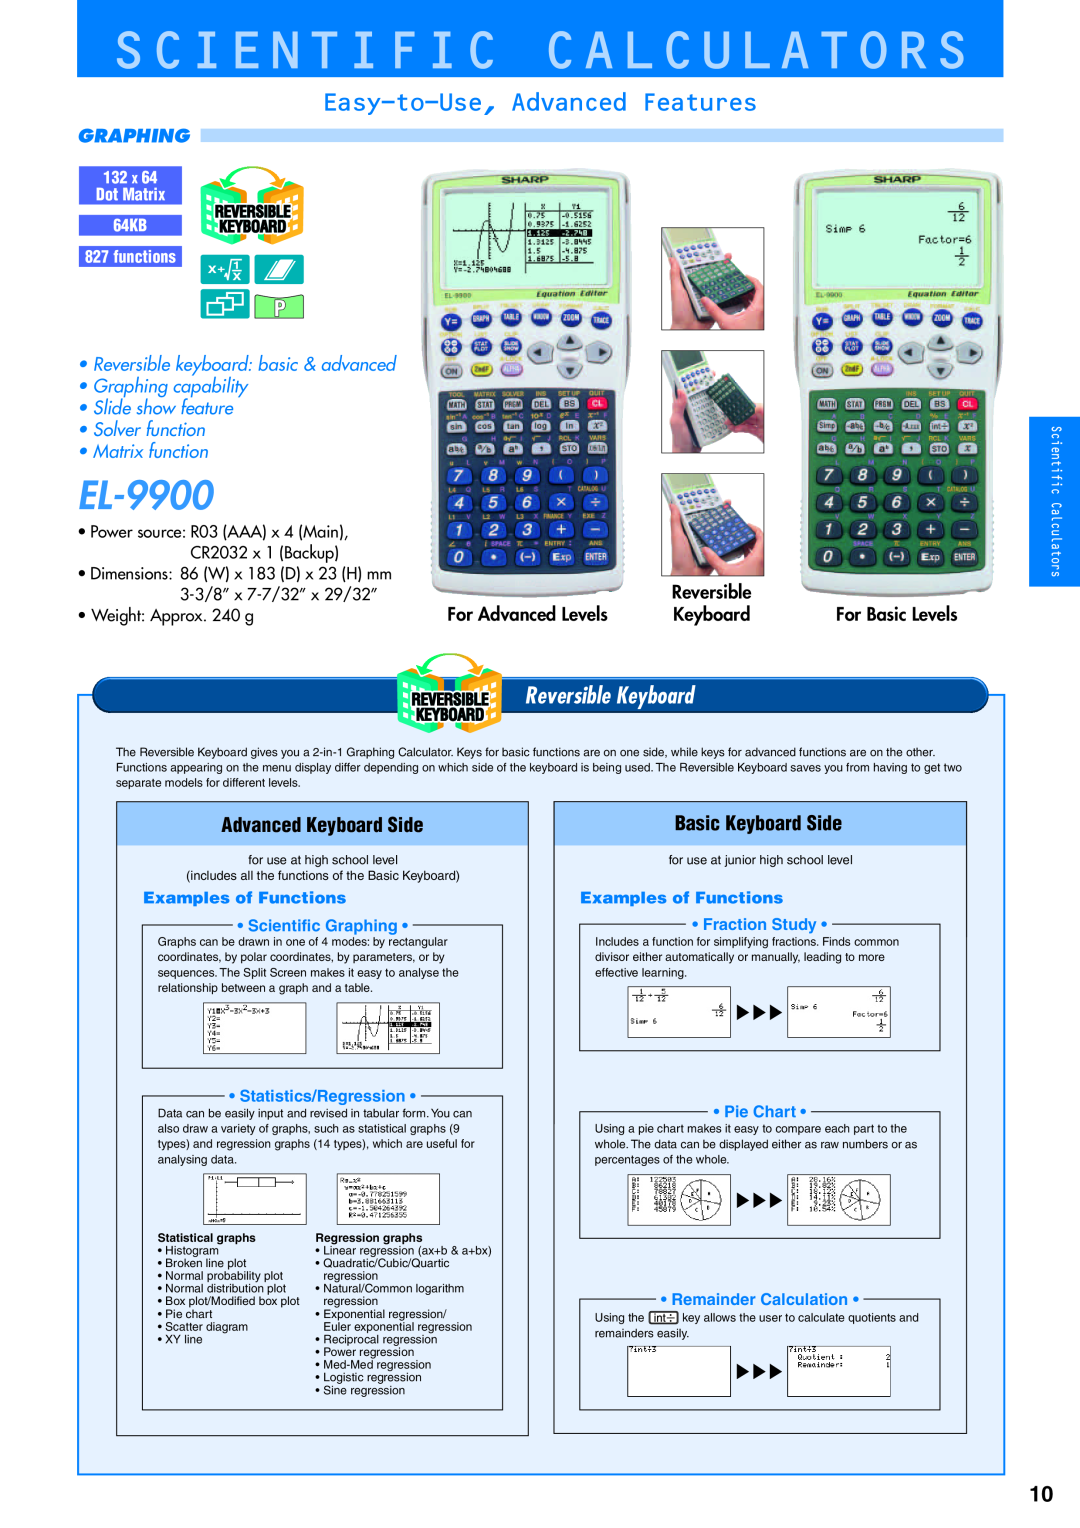 Sharp electronic calculator Scientific Calculators, EL-9900, Easy-to-Use, Advanced Features, Reversible Keyboard, Graphing 